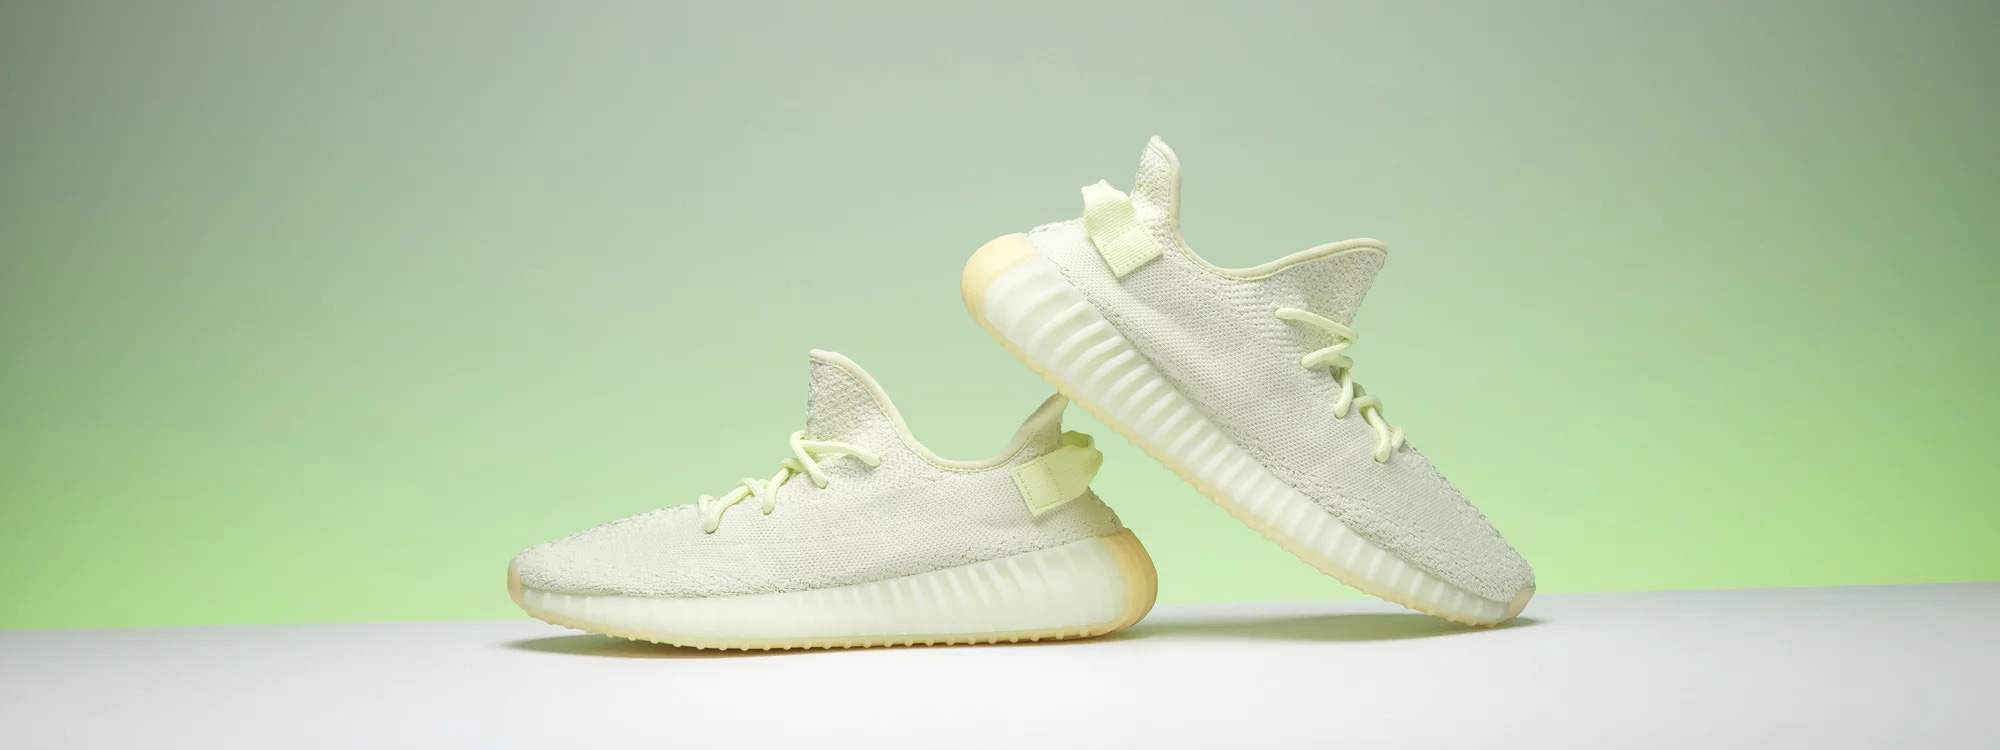 Buy New Adidas Yeezy Boost 350 V2 Butter shoes online